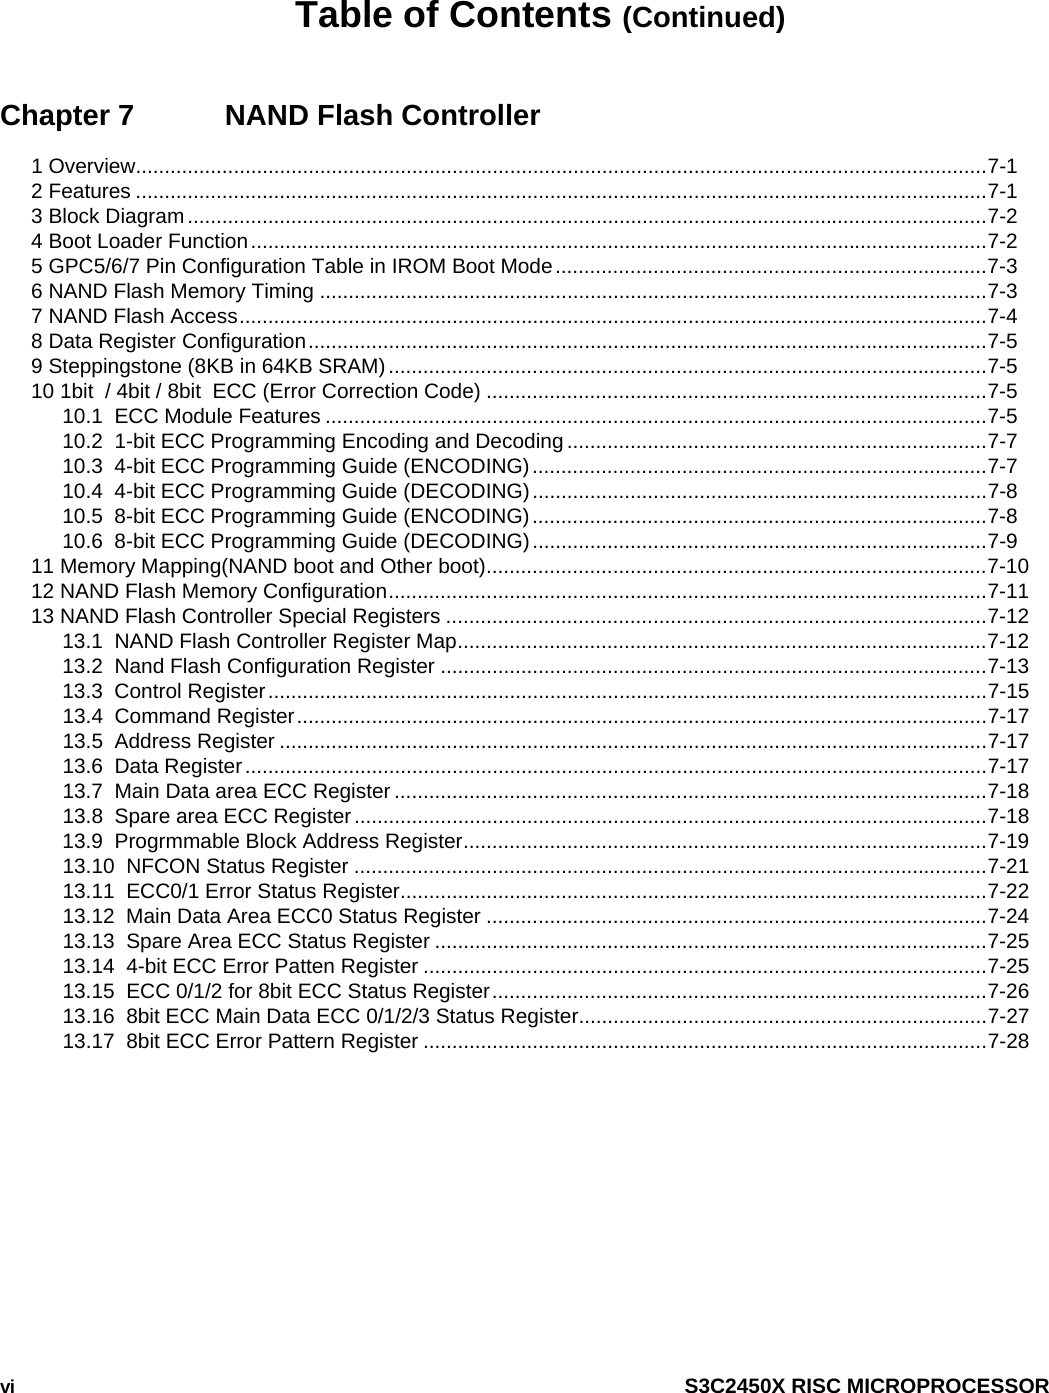  vi  S3C2450X RISC MICROPROCESSOR Table of Contents (Continued) Chapter 7    NAND Flash Controller 1 Overview....................................................................................................................................................7-1 2 Features ....................................................................................................................................................7-1 3 Block Diagram ...........................................................................................................................................7-2 4 Boot Loader Function................................................................................................................................7-2 5 GPC5/6/7 Pin Configuration Table in IROM Boot Mode...........................................................................7-3 6 NAND Flash Memory Timing ....................................................................................................................7-3 7 NAND Flash Access..................................................................................................................................7-4 8 Data Register Configuration......................................................................................................................7-5 9 Steppingstone (8KB in 64KB SRAM)........................................................................................................7-5 10 1bit  / 4bit / 8bit  ECC (Error Correction Code) .......................................................................................7-5 10.1  ECC Module Features ...................................................................................................................7-5 10.2  1-bit ECC Programming Encoding and Decoding .........................................................................7-7 10.3  4-bit ECC Programming Guide (ENCODING)...............................................................................7-7 10.4  4-bit ECC Programming Guide (DECODING)...............................................................................7-8 10.5  8-bit ECC Programming Guide (ENCODING)...............................................................................7-8 10.6  8-bit ECC Programming Guide (DECODING)...............................................................................7-9 11 Memory Mapping(NAND boot and Other boot).......................................................................................7-10 12 NAND Flash Memory Configuration........................................................................................................7-11 13 NAND Flash Controller Special Registers ..............................................................................................7-12 13.1  NAND Flash Controller Register Map............................................................................................7-12 13.2  Nand Flash Configuration Register ...............................................................................................7-13 13.3  Control Register.............................................................................................................................7-15 13.4  Command Register........................................................................................................................7-17 13.5  Address Register ...........................................................................................................................7-17 13.6  Data Register.................................................................................................................................7-17 13.7  Main Data area ECC Register .......................................................................................................7-18 13.8  Spare area ECC Register..............................................................................................................7-18 13.9  Progrmmable Block Address Register...........................................................................................7-19 13.10  NFCON Status Register ..............................................................................................................7-21 13.11  ECC0/1 Error Status Register......................................................................................................7-22 13.12  Main Data Area ECC0 Status Register .......................................................................................7-24 13.13  Spare Area ECC Status Register ................................................................................................7-25 13.14  4-bit ECC Error Patten Register ..................................................................................................7-25 13.15  ECC 0/1/2 for 8bit ECC Status Register......................................................................................7-26 13.16  8bit ECC Main Data ECC 0/1/2/3 Status Register.......................................................................7-27 13.17  8bit ECC Error Pattern Register ..................................................................................................7-28  